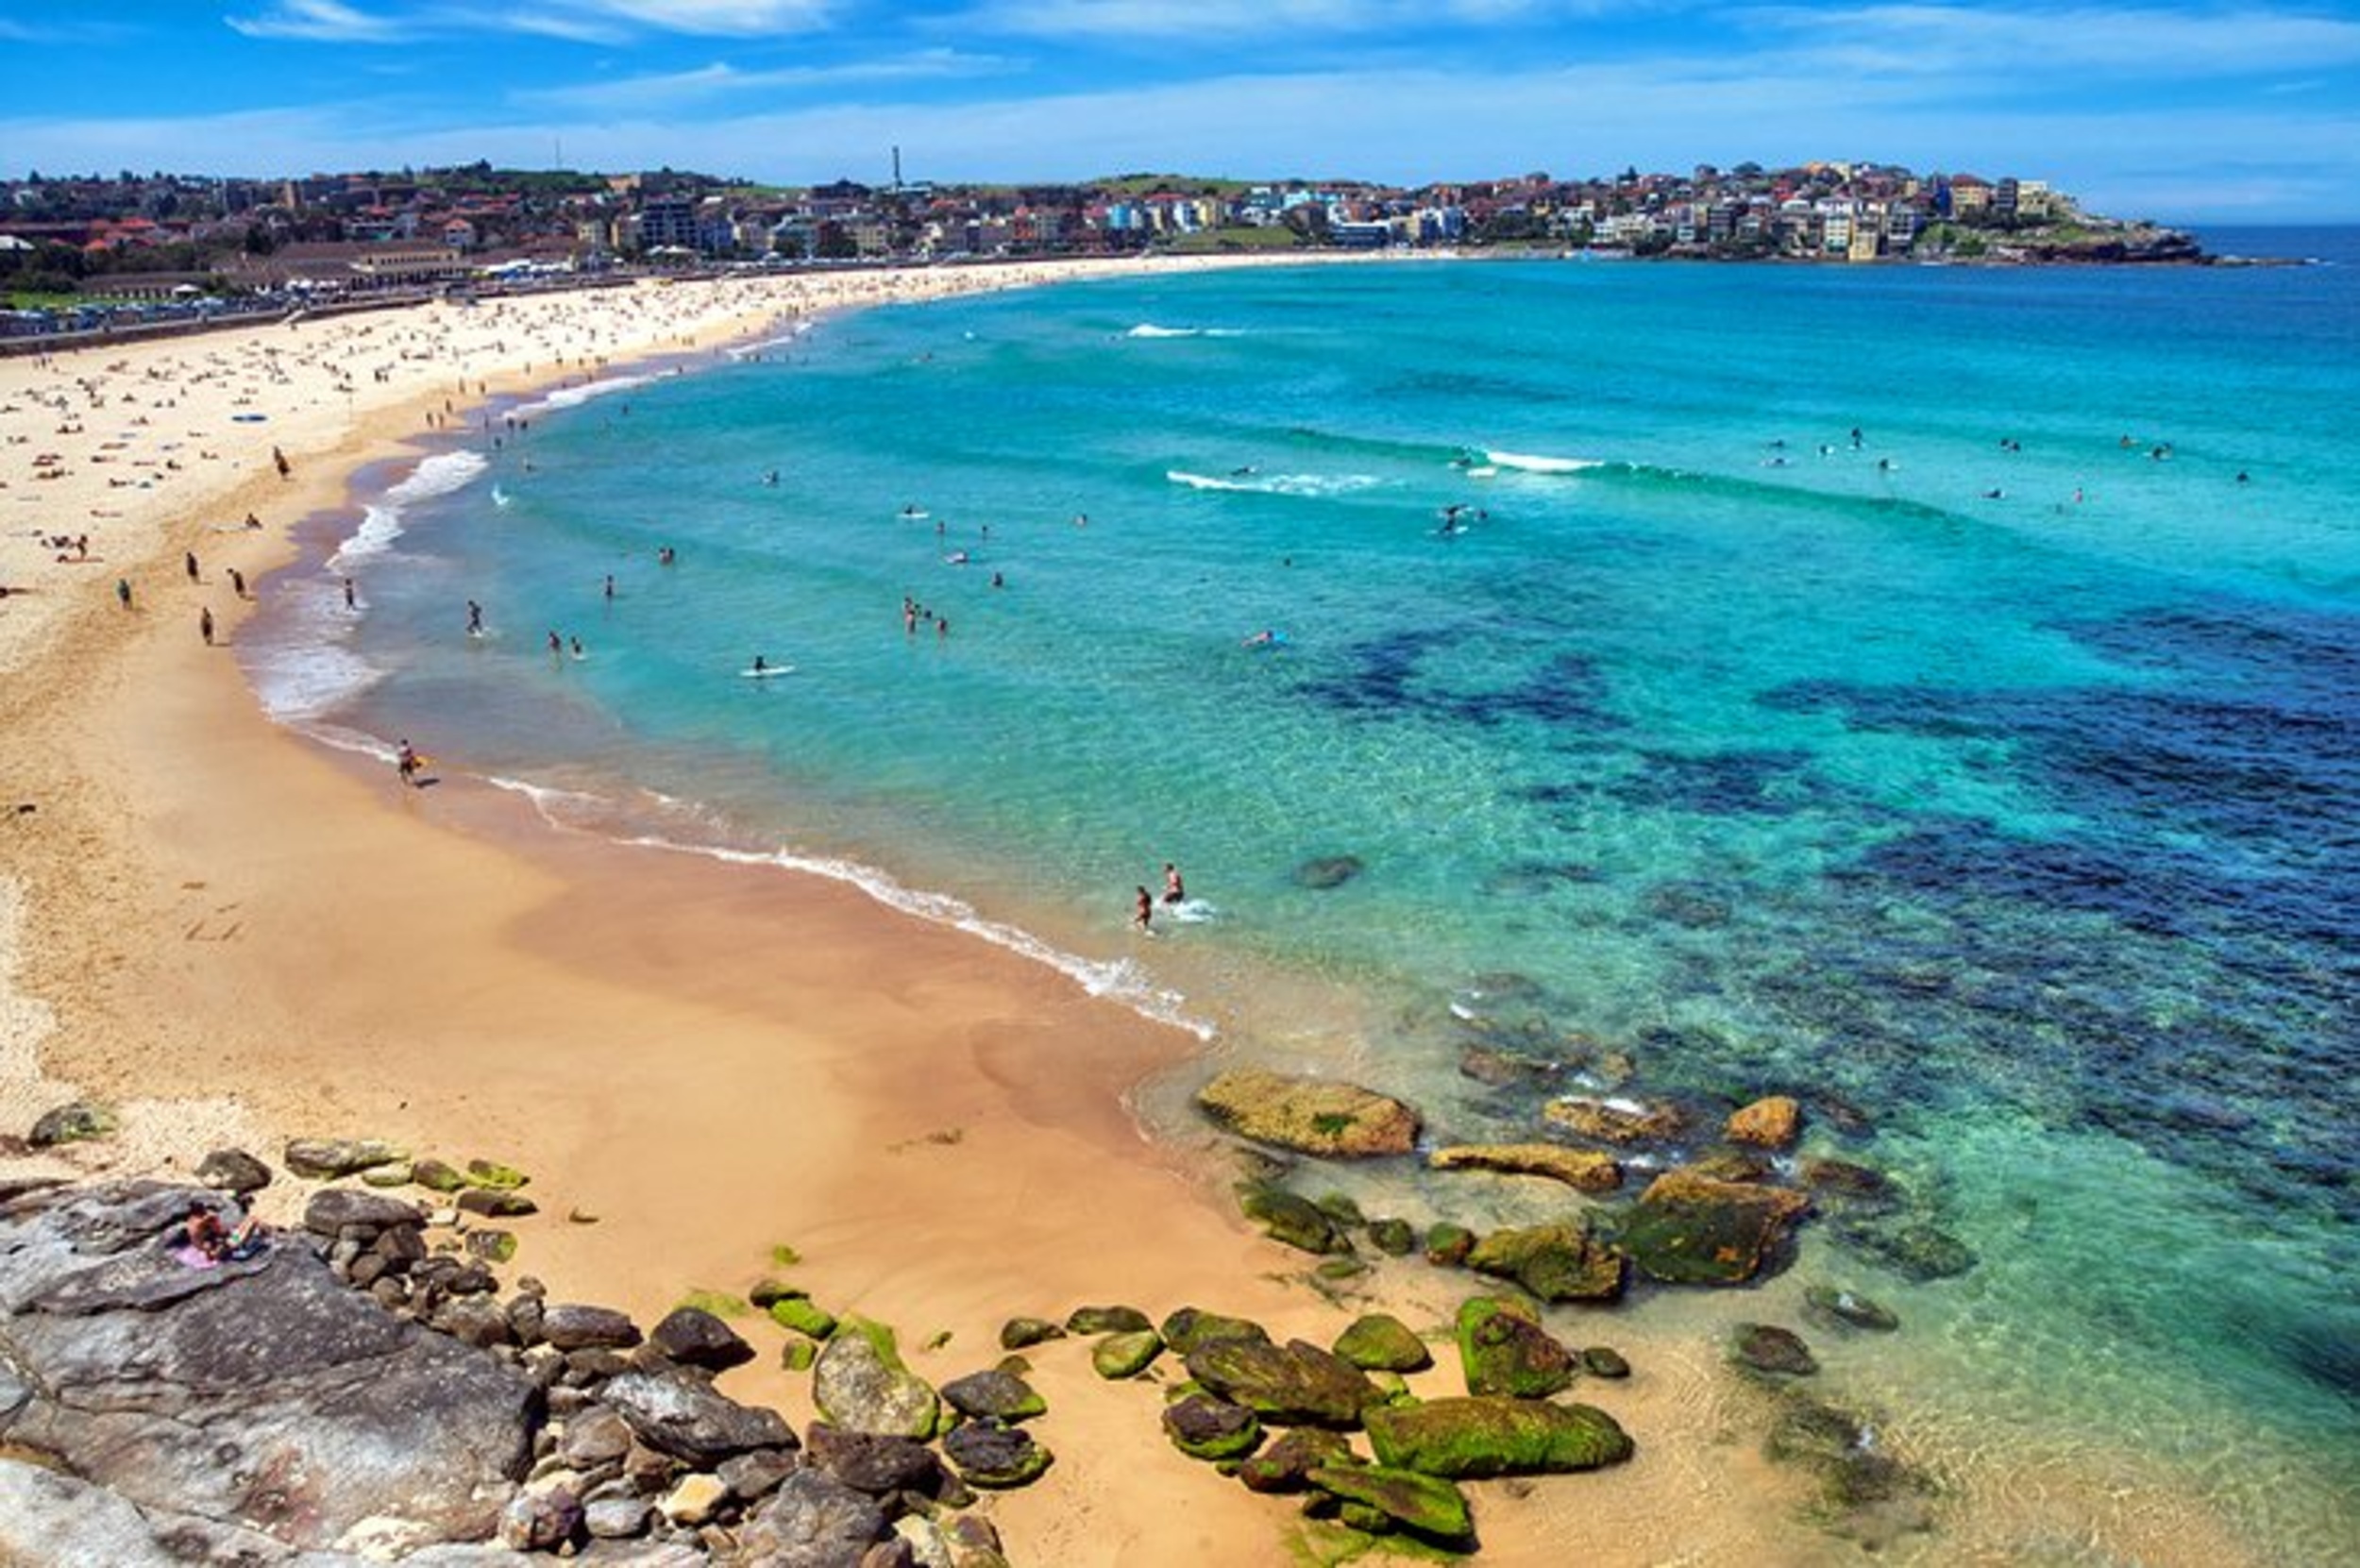 <p>The beaches of Sydney rank among the best in the world. The sands are glowing, the waters are shimmering and turquoise, and the vibes are wonderful. You should walk down these beaches if you can--you will never forget the oceans of Sydney.</p><p><a href='https://www.msn.com/en-us/community/channel/vid-cj9pqbr0vn9in2b6ddcd8sfgpfq6x6utp44fssrv6mc2gtybw0us'>Did you enjoy this slideshow? Follow us on MSN to see more of our exclusive lifestyle content.</a></p>